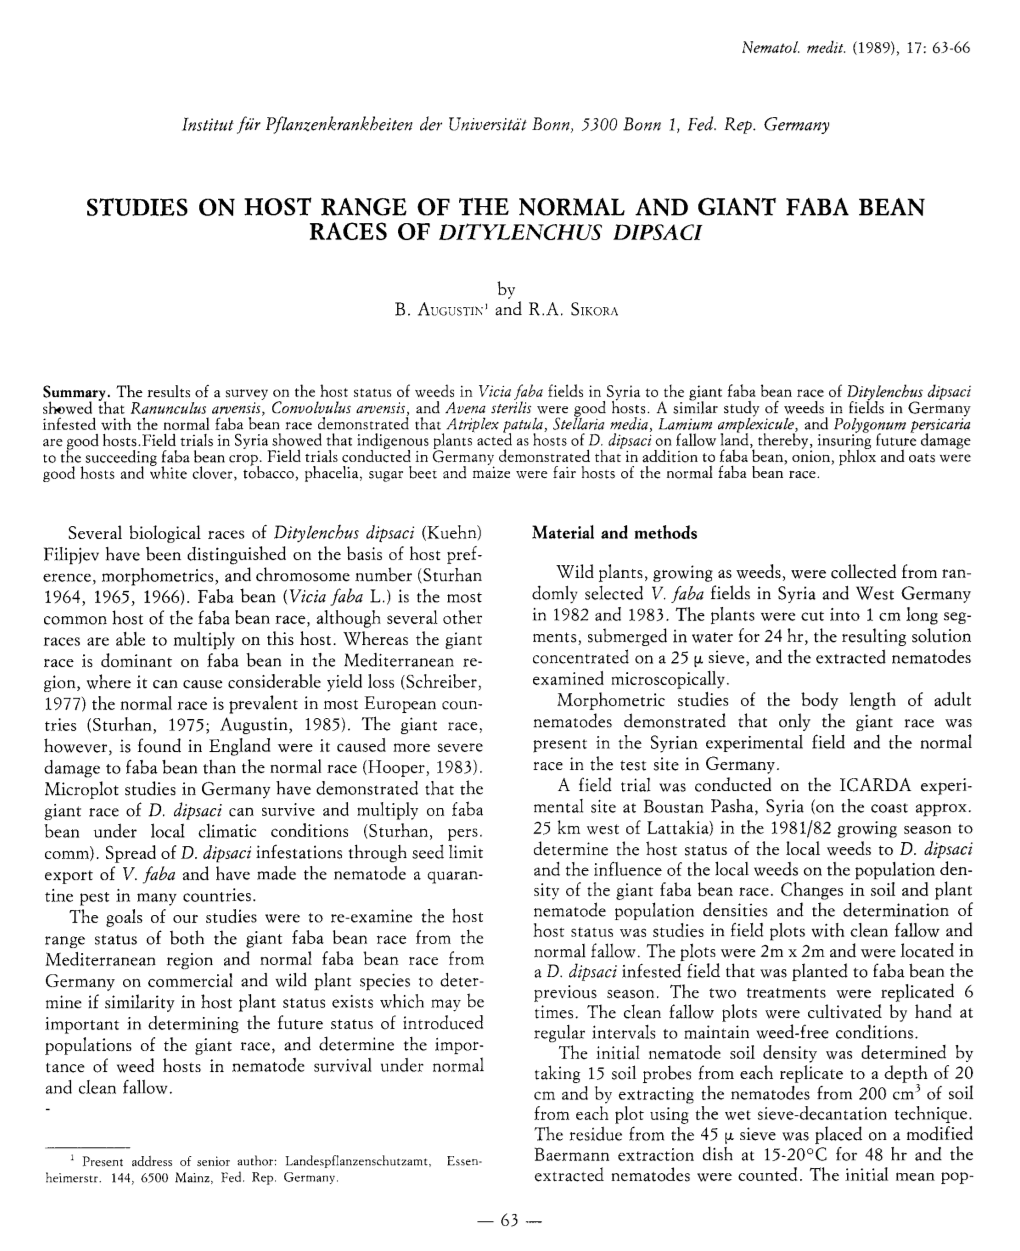 Studies on Host Range of the Normal and Giant Faba Bean Races of Ditylenchus Dipsaci